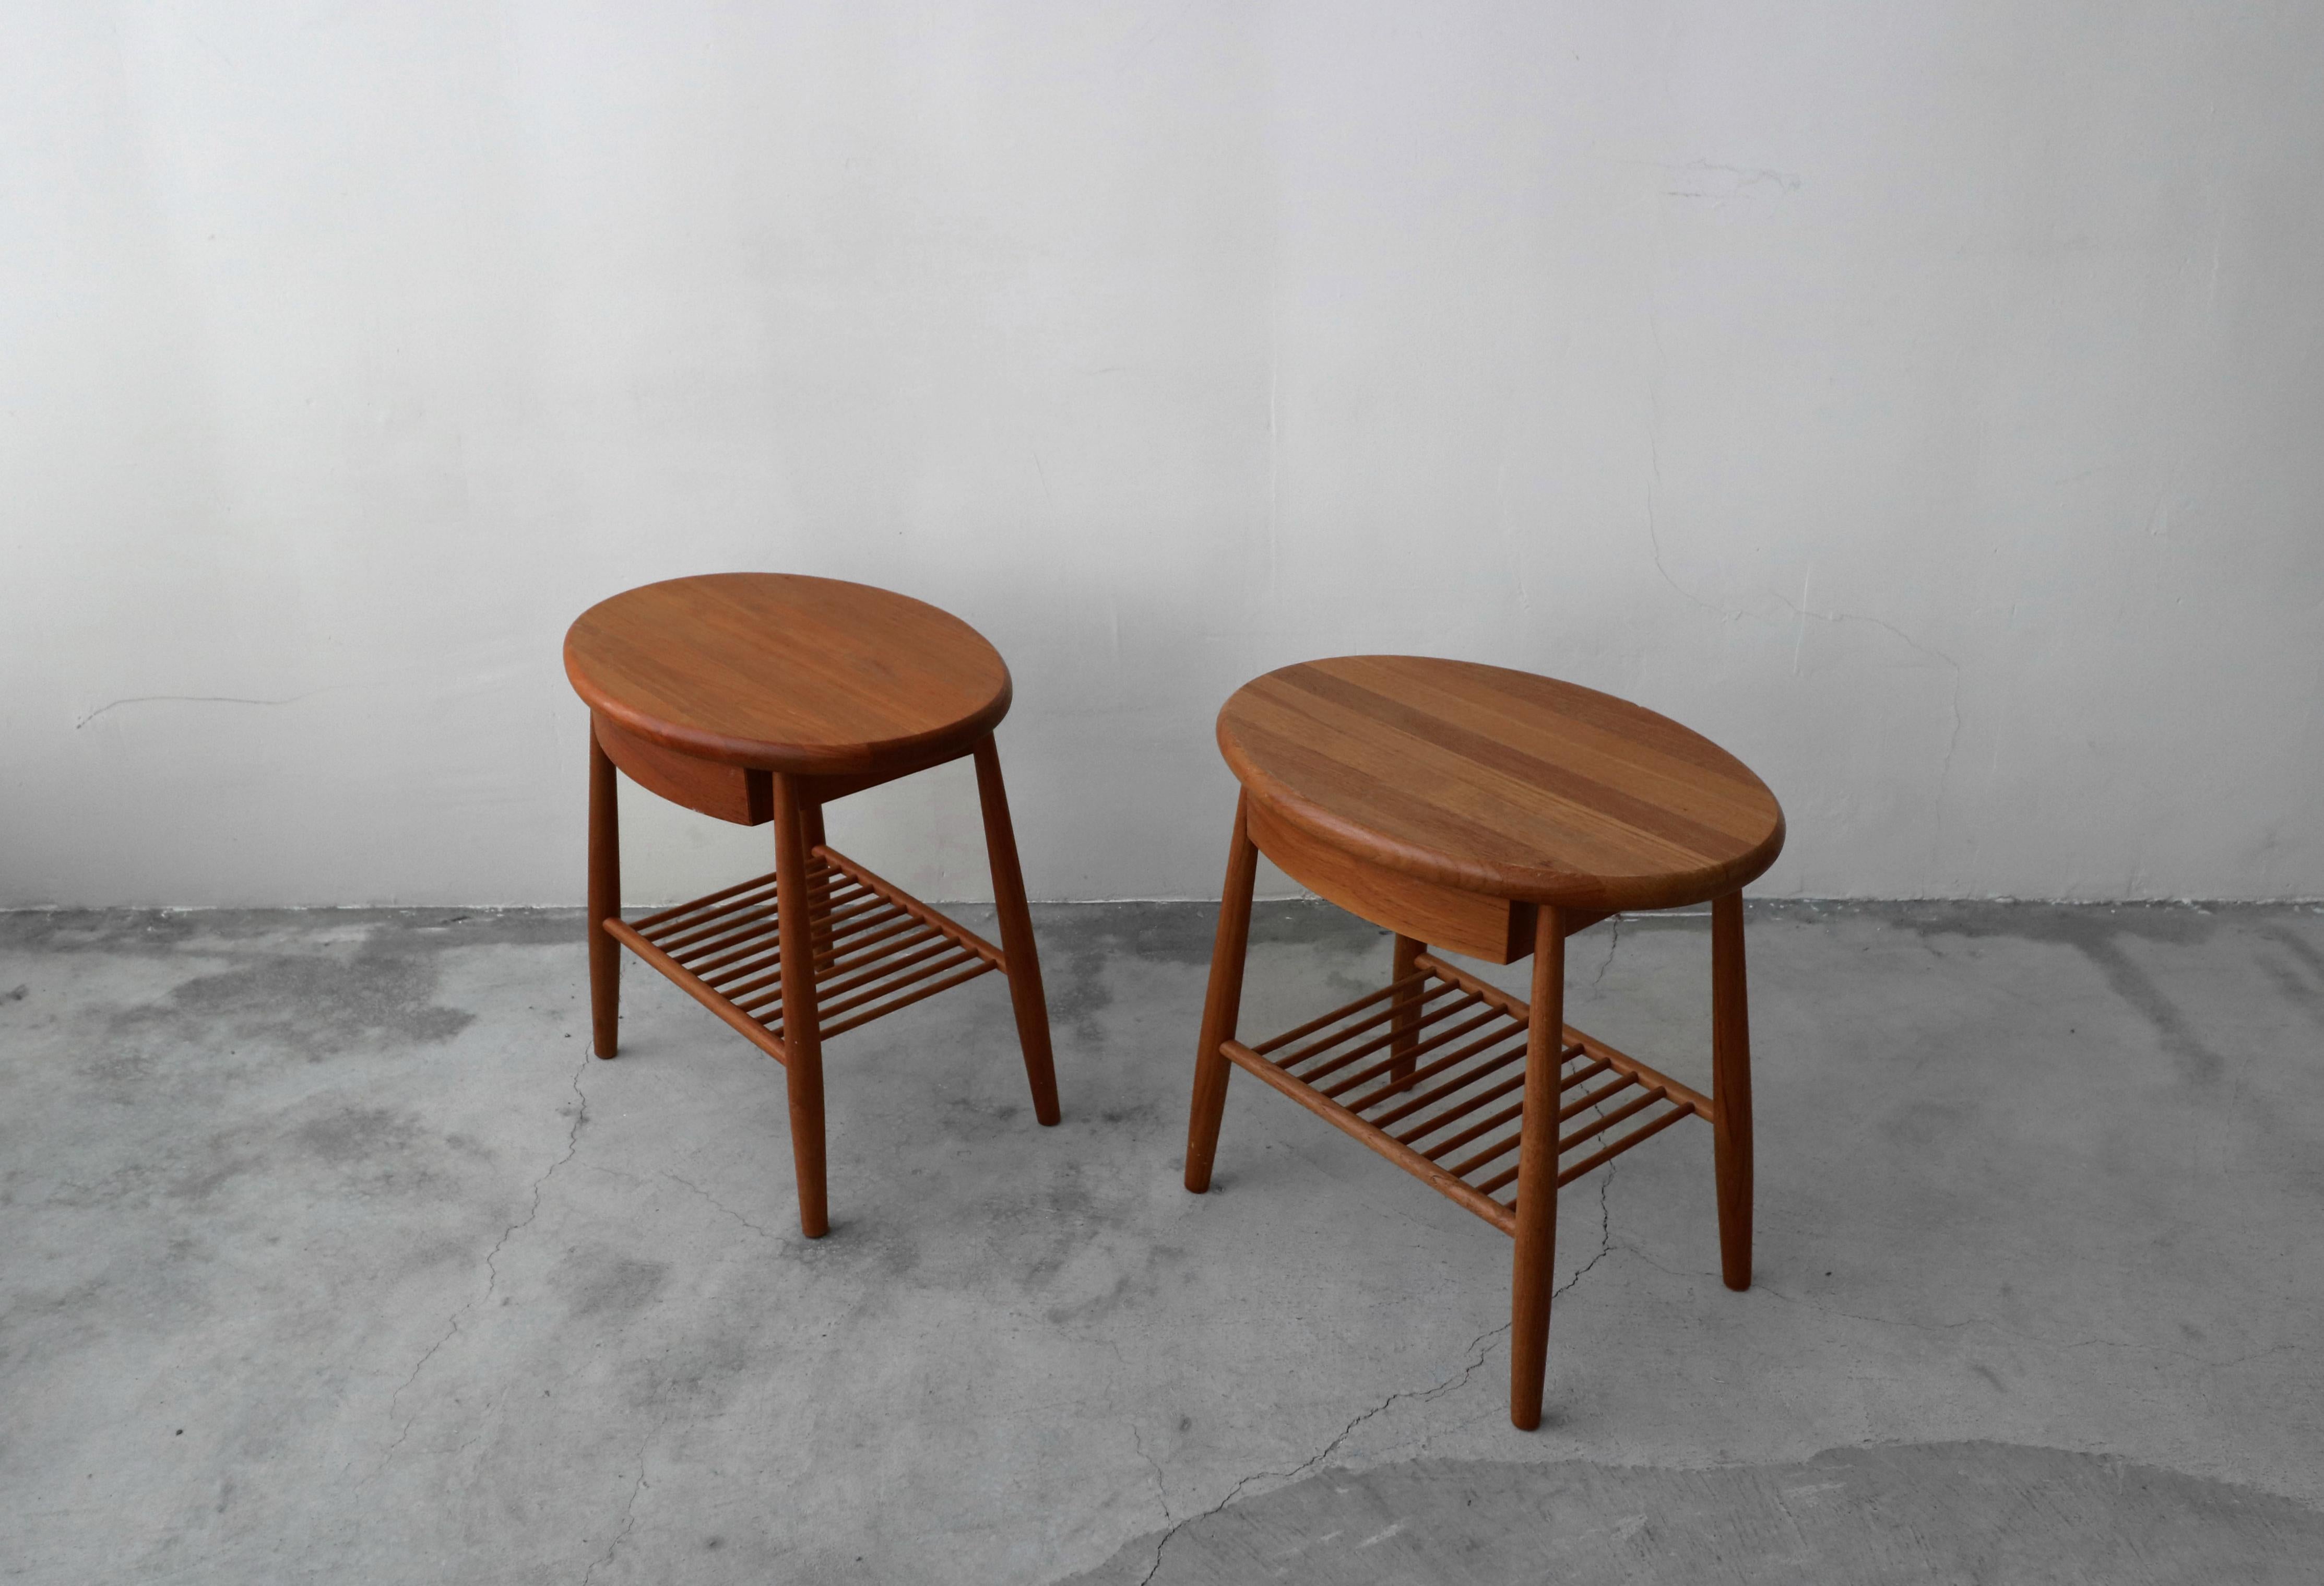 20th Century Pair of Solid Teak Oval Midcentury Danish Side Tables with Drawer